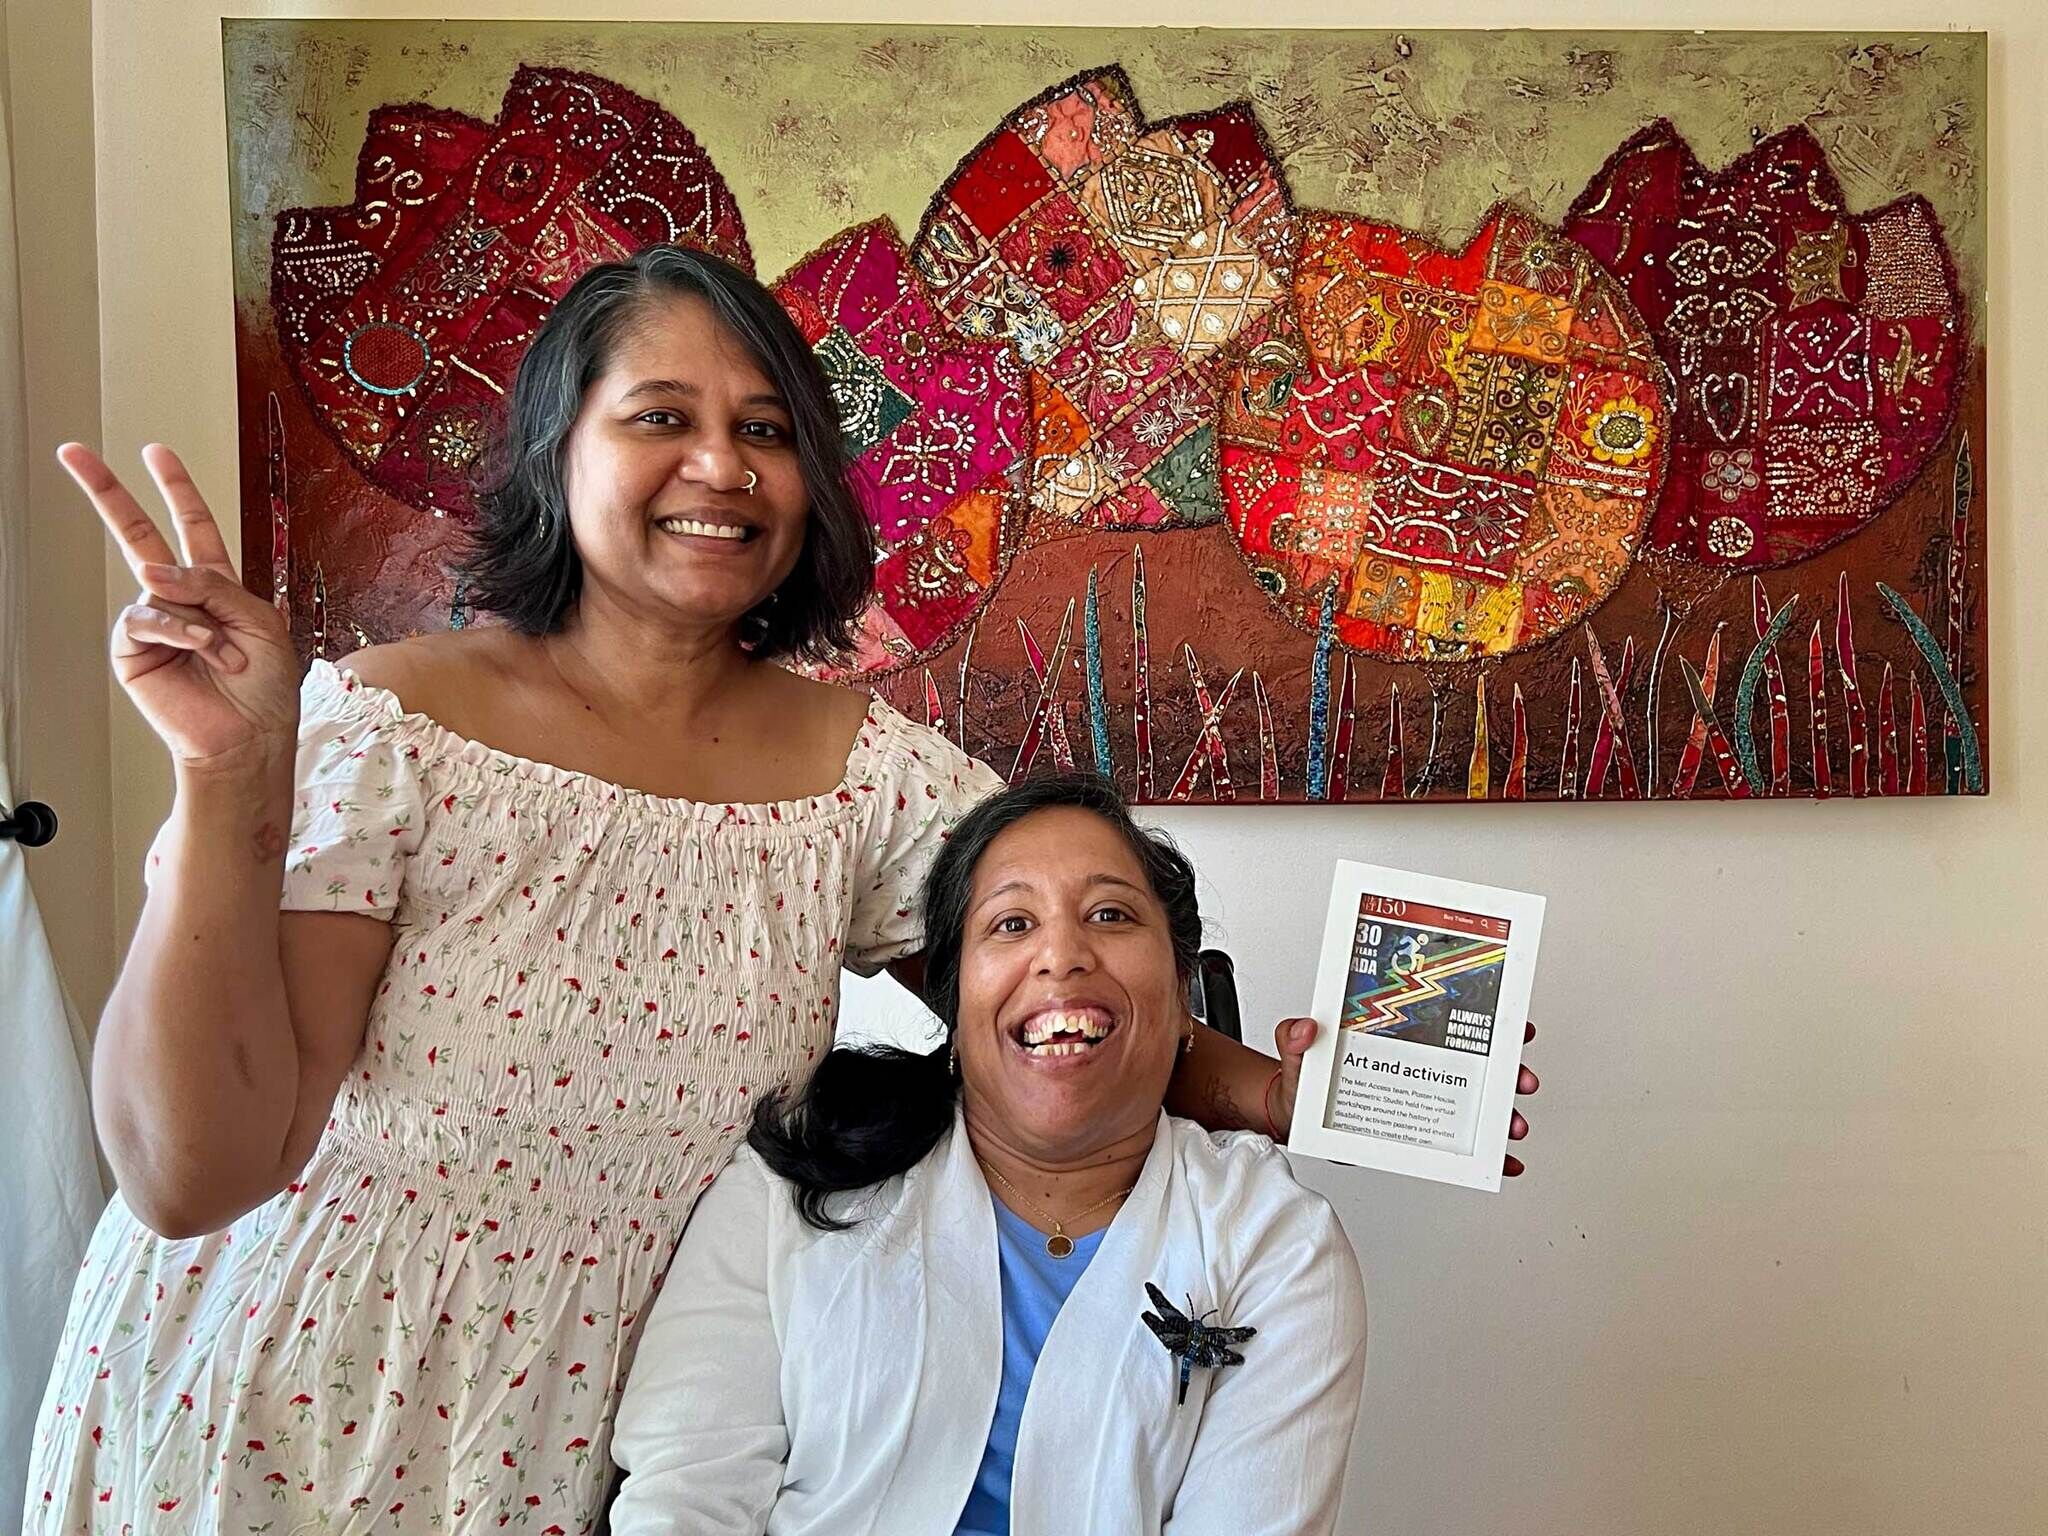 Lakshmee and Annie are Indo-Caribbean, women of color and mid age. Lakshmee has non apparent disabilities and Annie, who uses a wheelchair, has visible disabilities. They’re standing in front of a very colorful painting. Lakshmee hugs Annie from the back of the wheelchair and are both smiling for the camera. One of Lakshmee's hand showcase the peace sign while the other that embraces Annie holds up a photo of a Disability Pride flag.